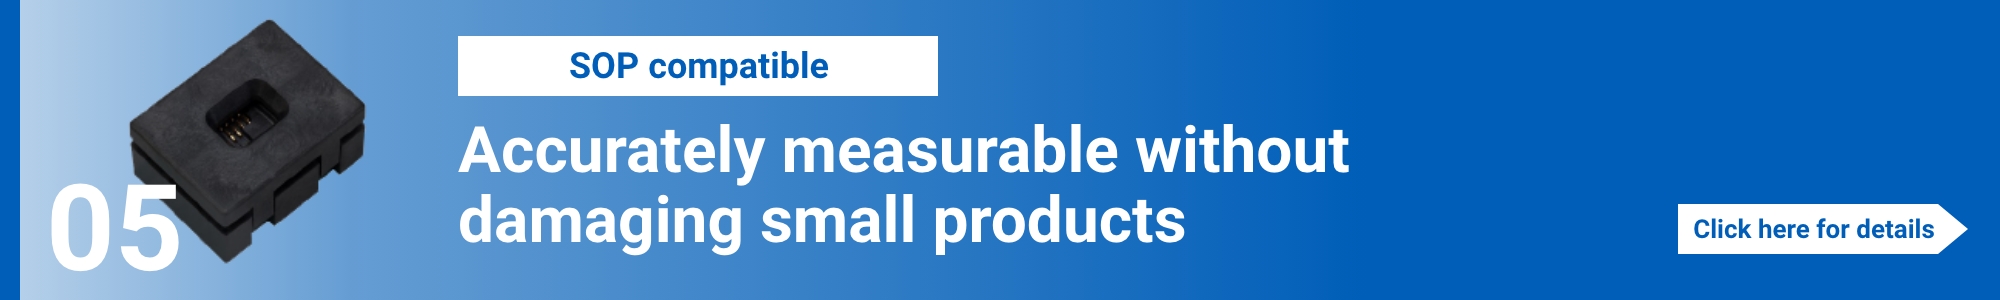 [SOP compatible]Accurately measurable without damaging small products. Click here for details